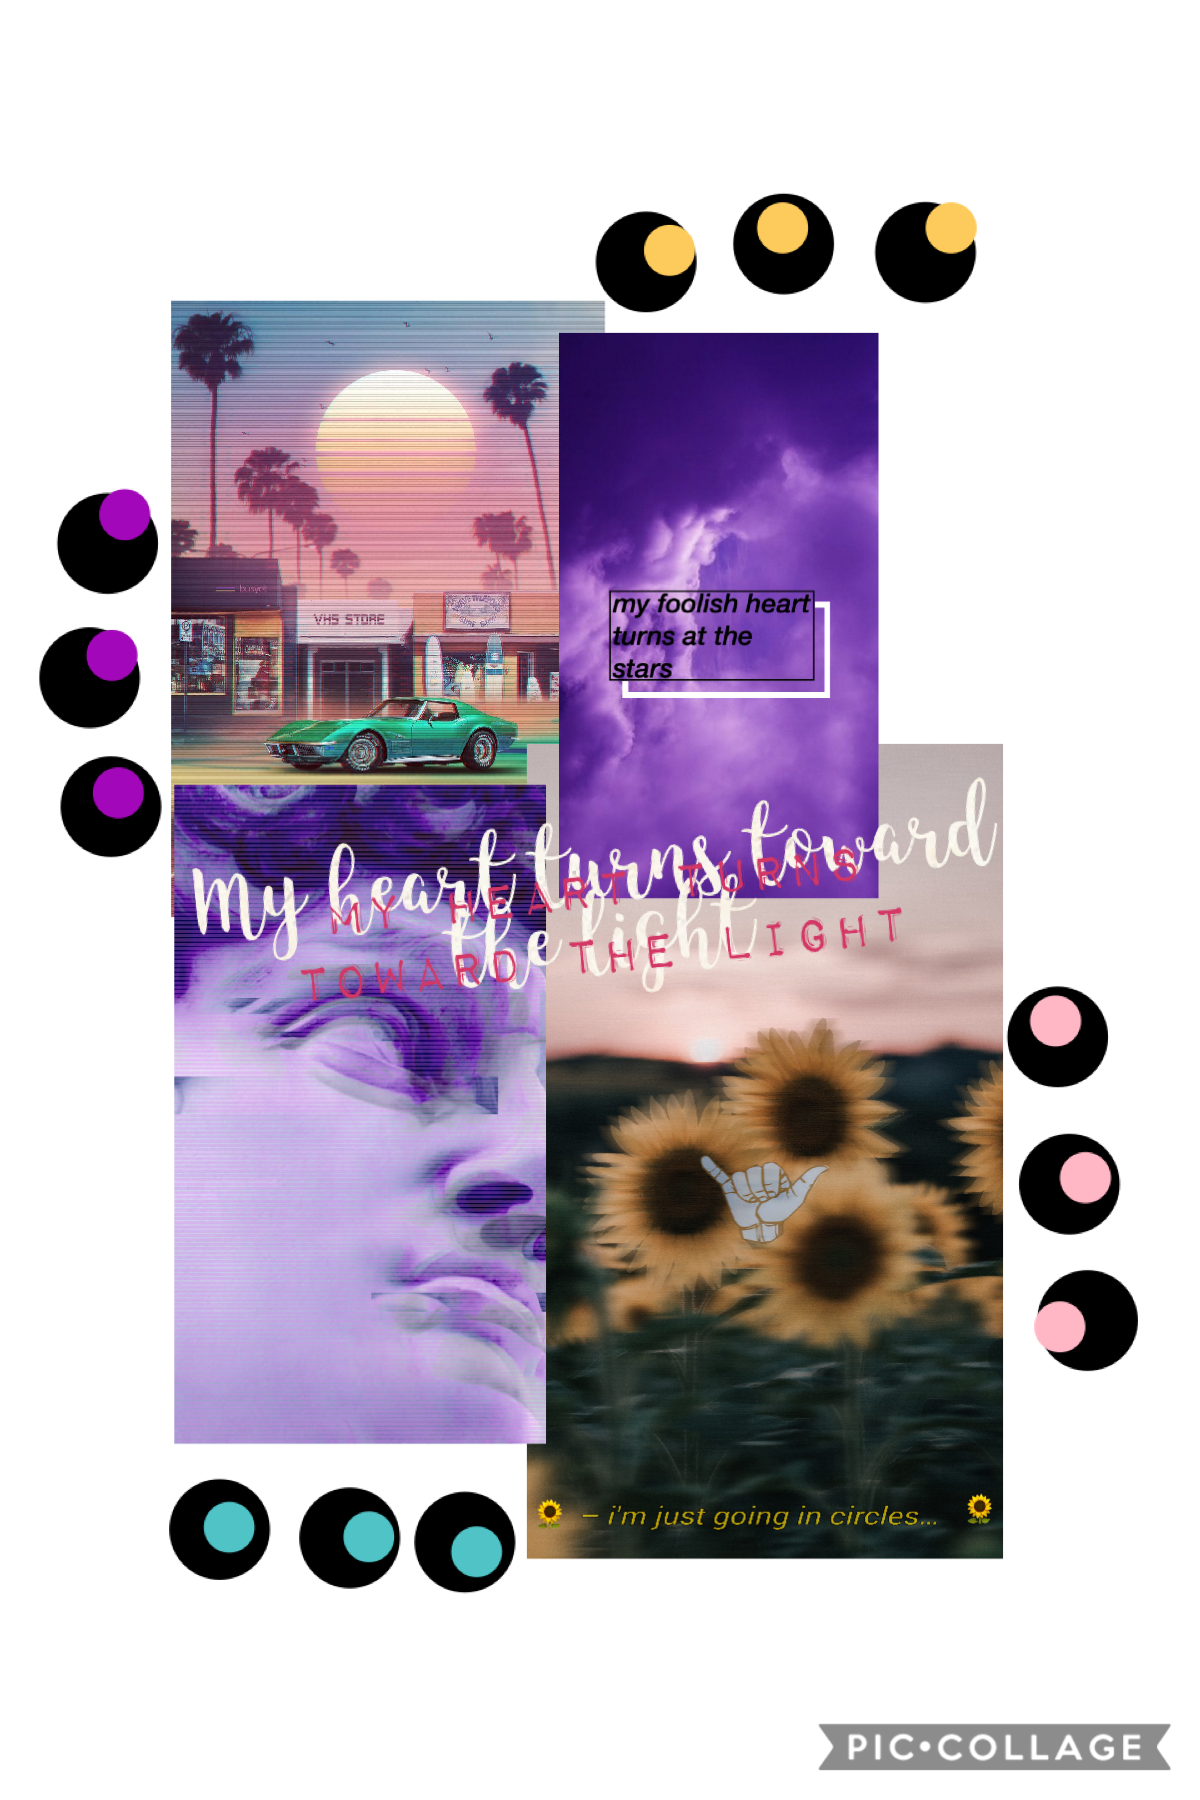 💜🔮💎tap💎🔮💜

•for clarification it’s my heart turn towards the light 
•inspired by  princesspoppy34 (sry if I got it wrong 😑) 
•I really like this🥺💜 
•bye purple is my fav color!:)